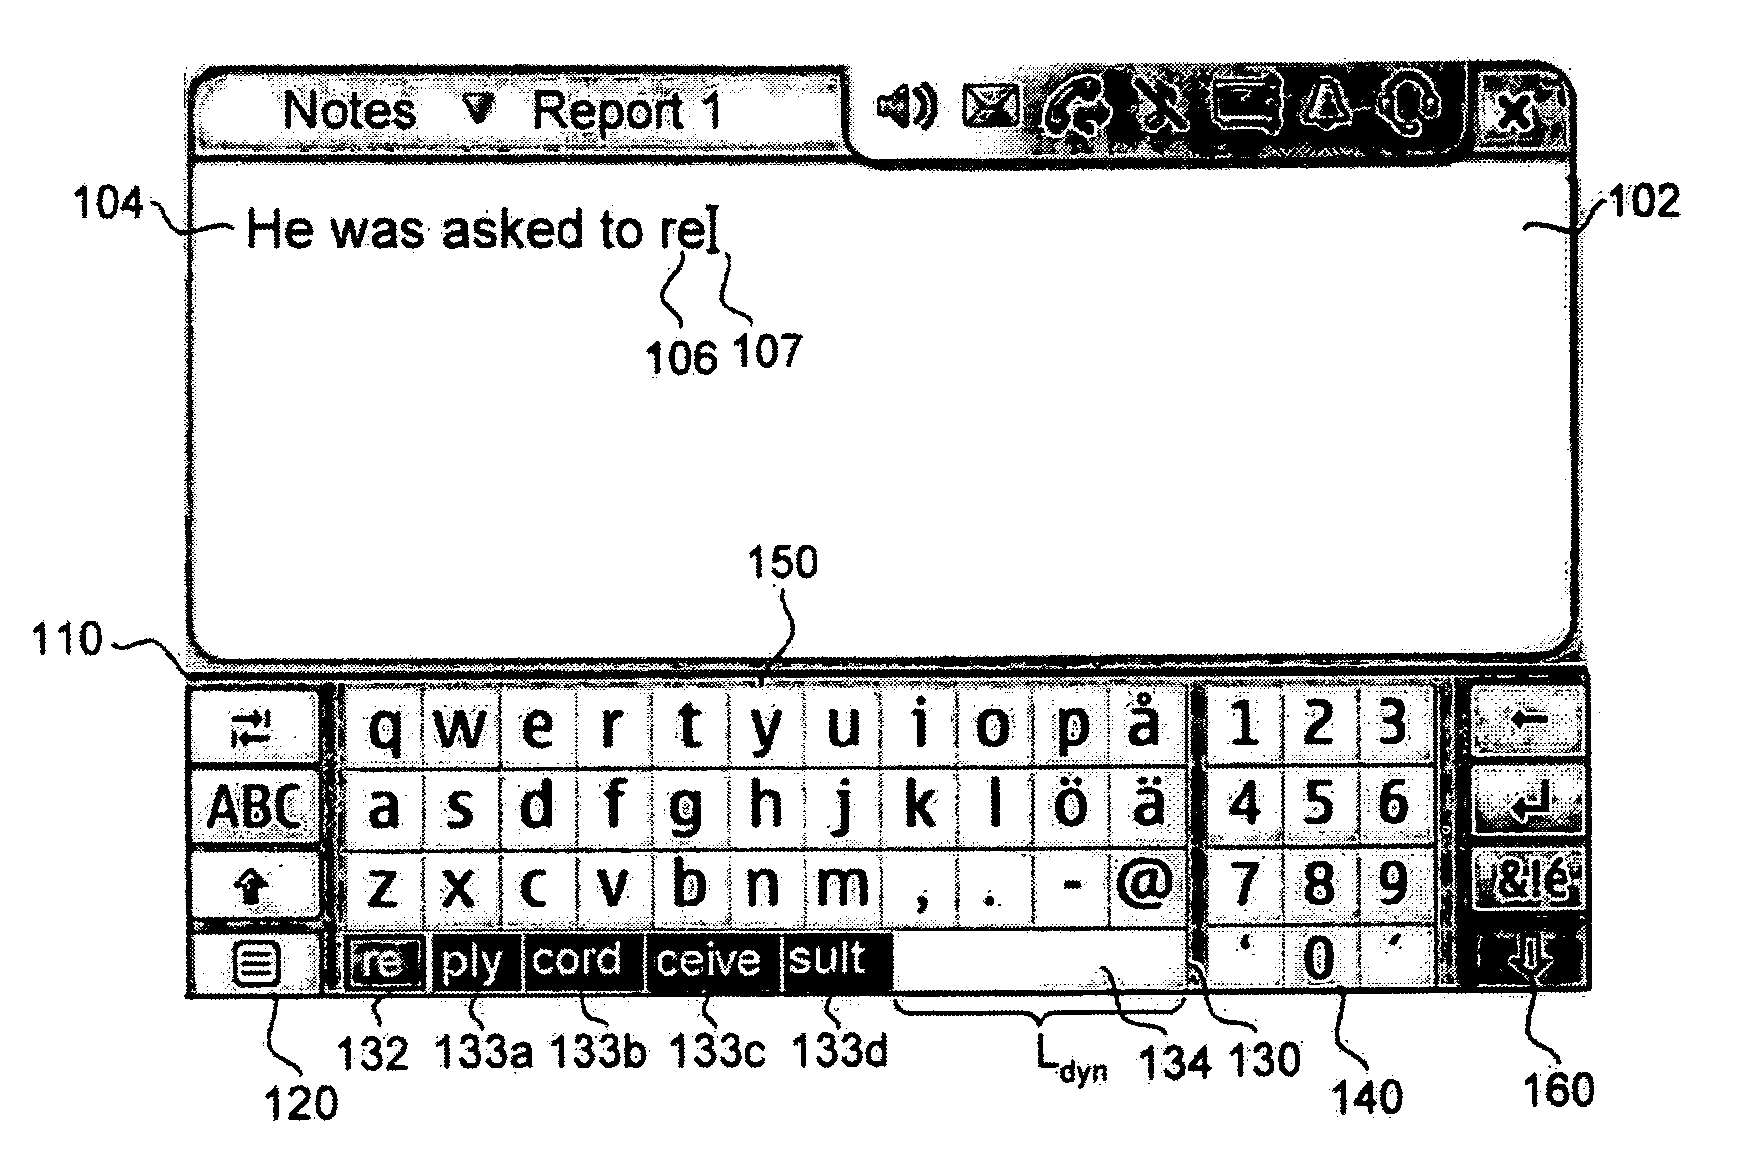 Electronic text input involving a virtual keyboard and word completion functionality on a touch-sensitive display screen